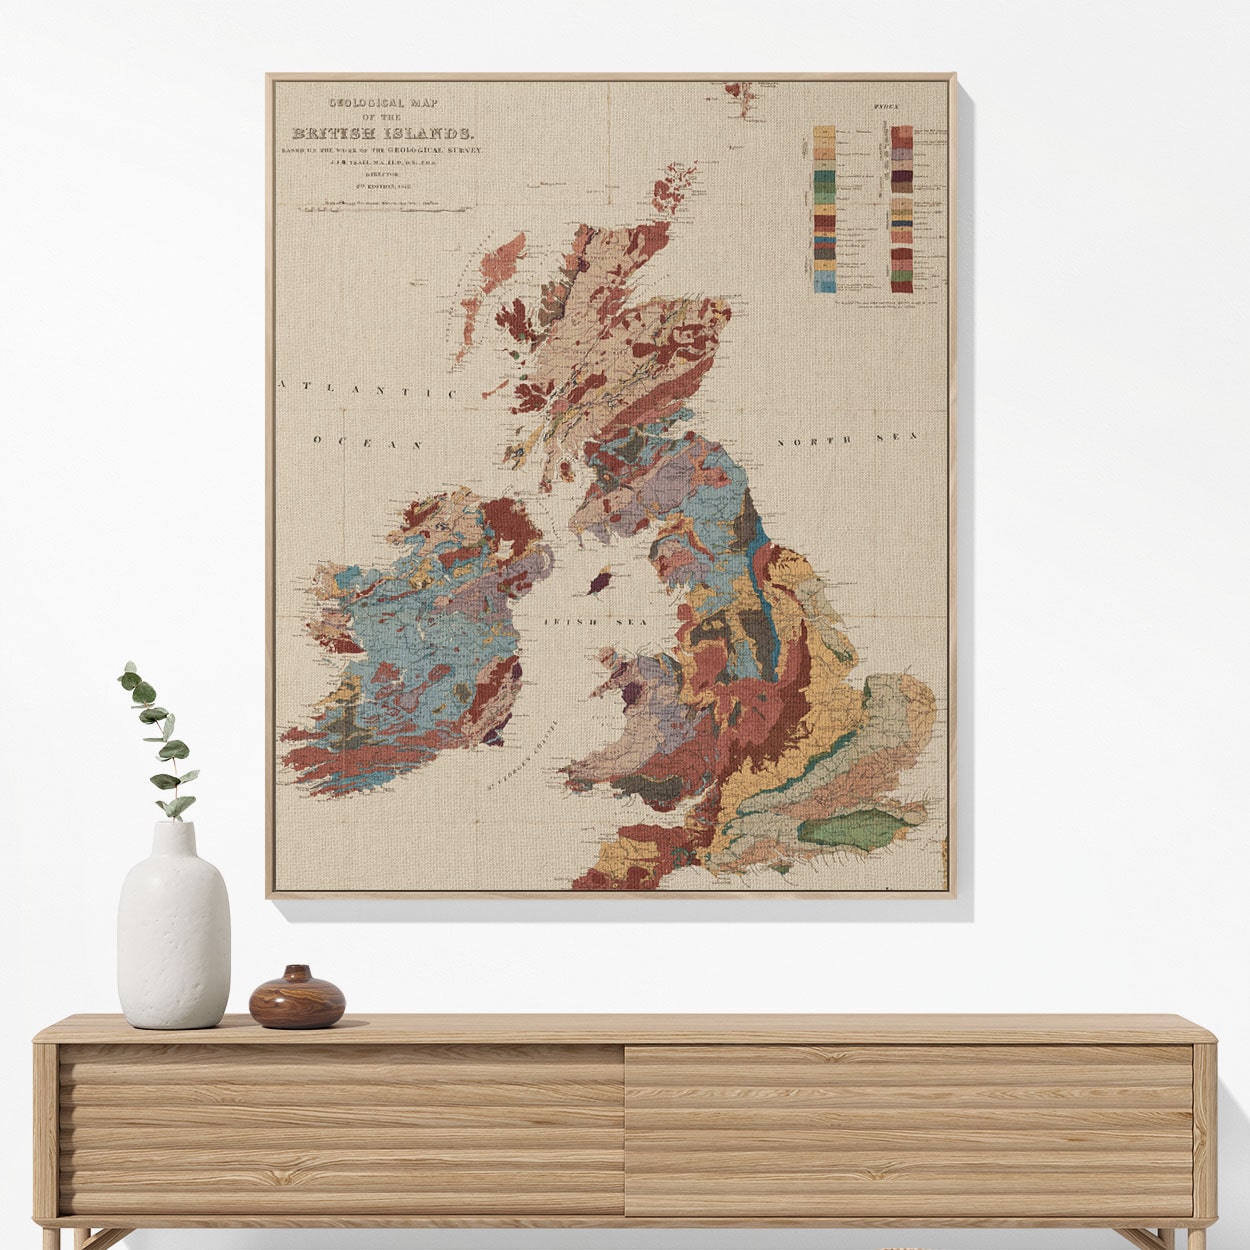 Vintage United Kingdom Map Woven Blanket Hanging on a Wall as Framed Wall Art